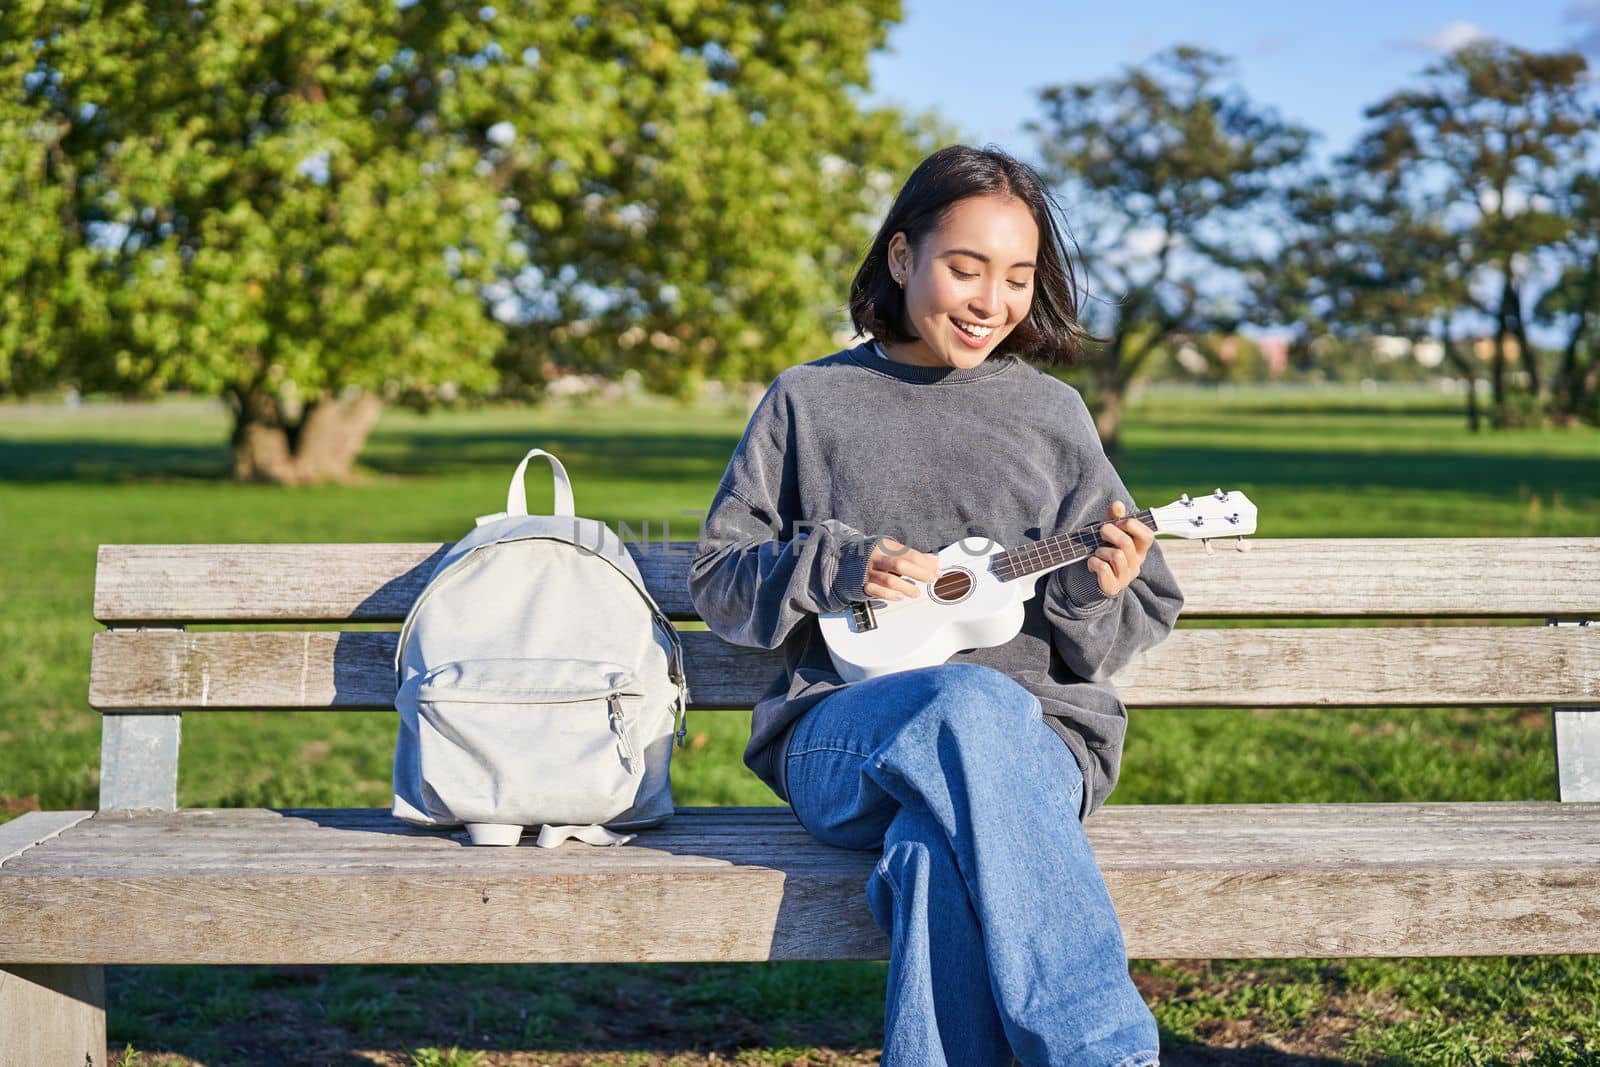 Beautiful asian girl plays ukulele outdoors, sits in park on bench with musical instrument.